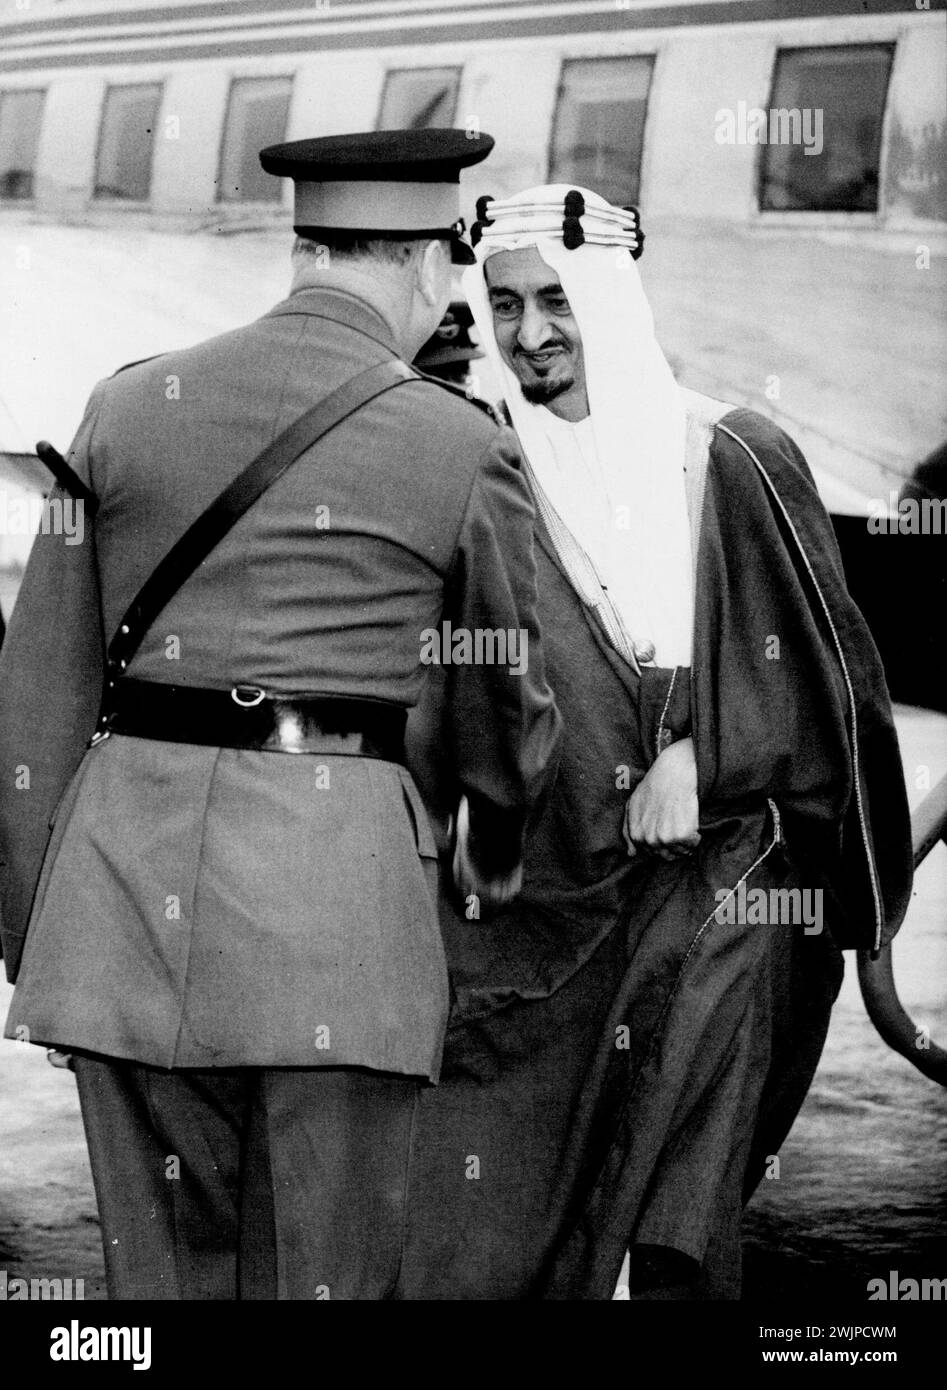 Prince From Arabia -- The Emir Feisal Being Greeted by the Duke of Gloucester on his arrival at Northolt airport this morning. One of the More Spectacular Arab Princes, Emir Feisal, Second son of King IBN Saud of Saudi Arabia, Came to London to-day. As his Country's Foreign Minister, he has Arrived on an official ten-day visit as Guest of the British Government. to-morrow, August 8, he will Dine with Mr. Morrison, British Foreign Secretary, at the Latter's Carlton Gardens Residence. A part from his talks with Mr. Morrison, A visit to Lewes Race next Saturday is also on the programme. The E ... Stock Photo